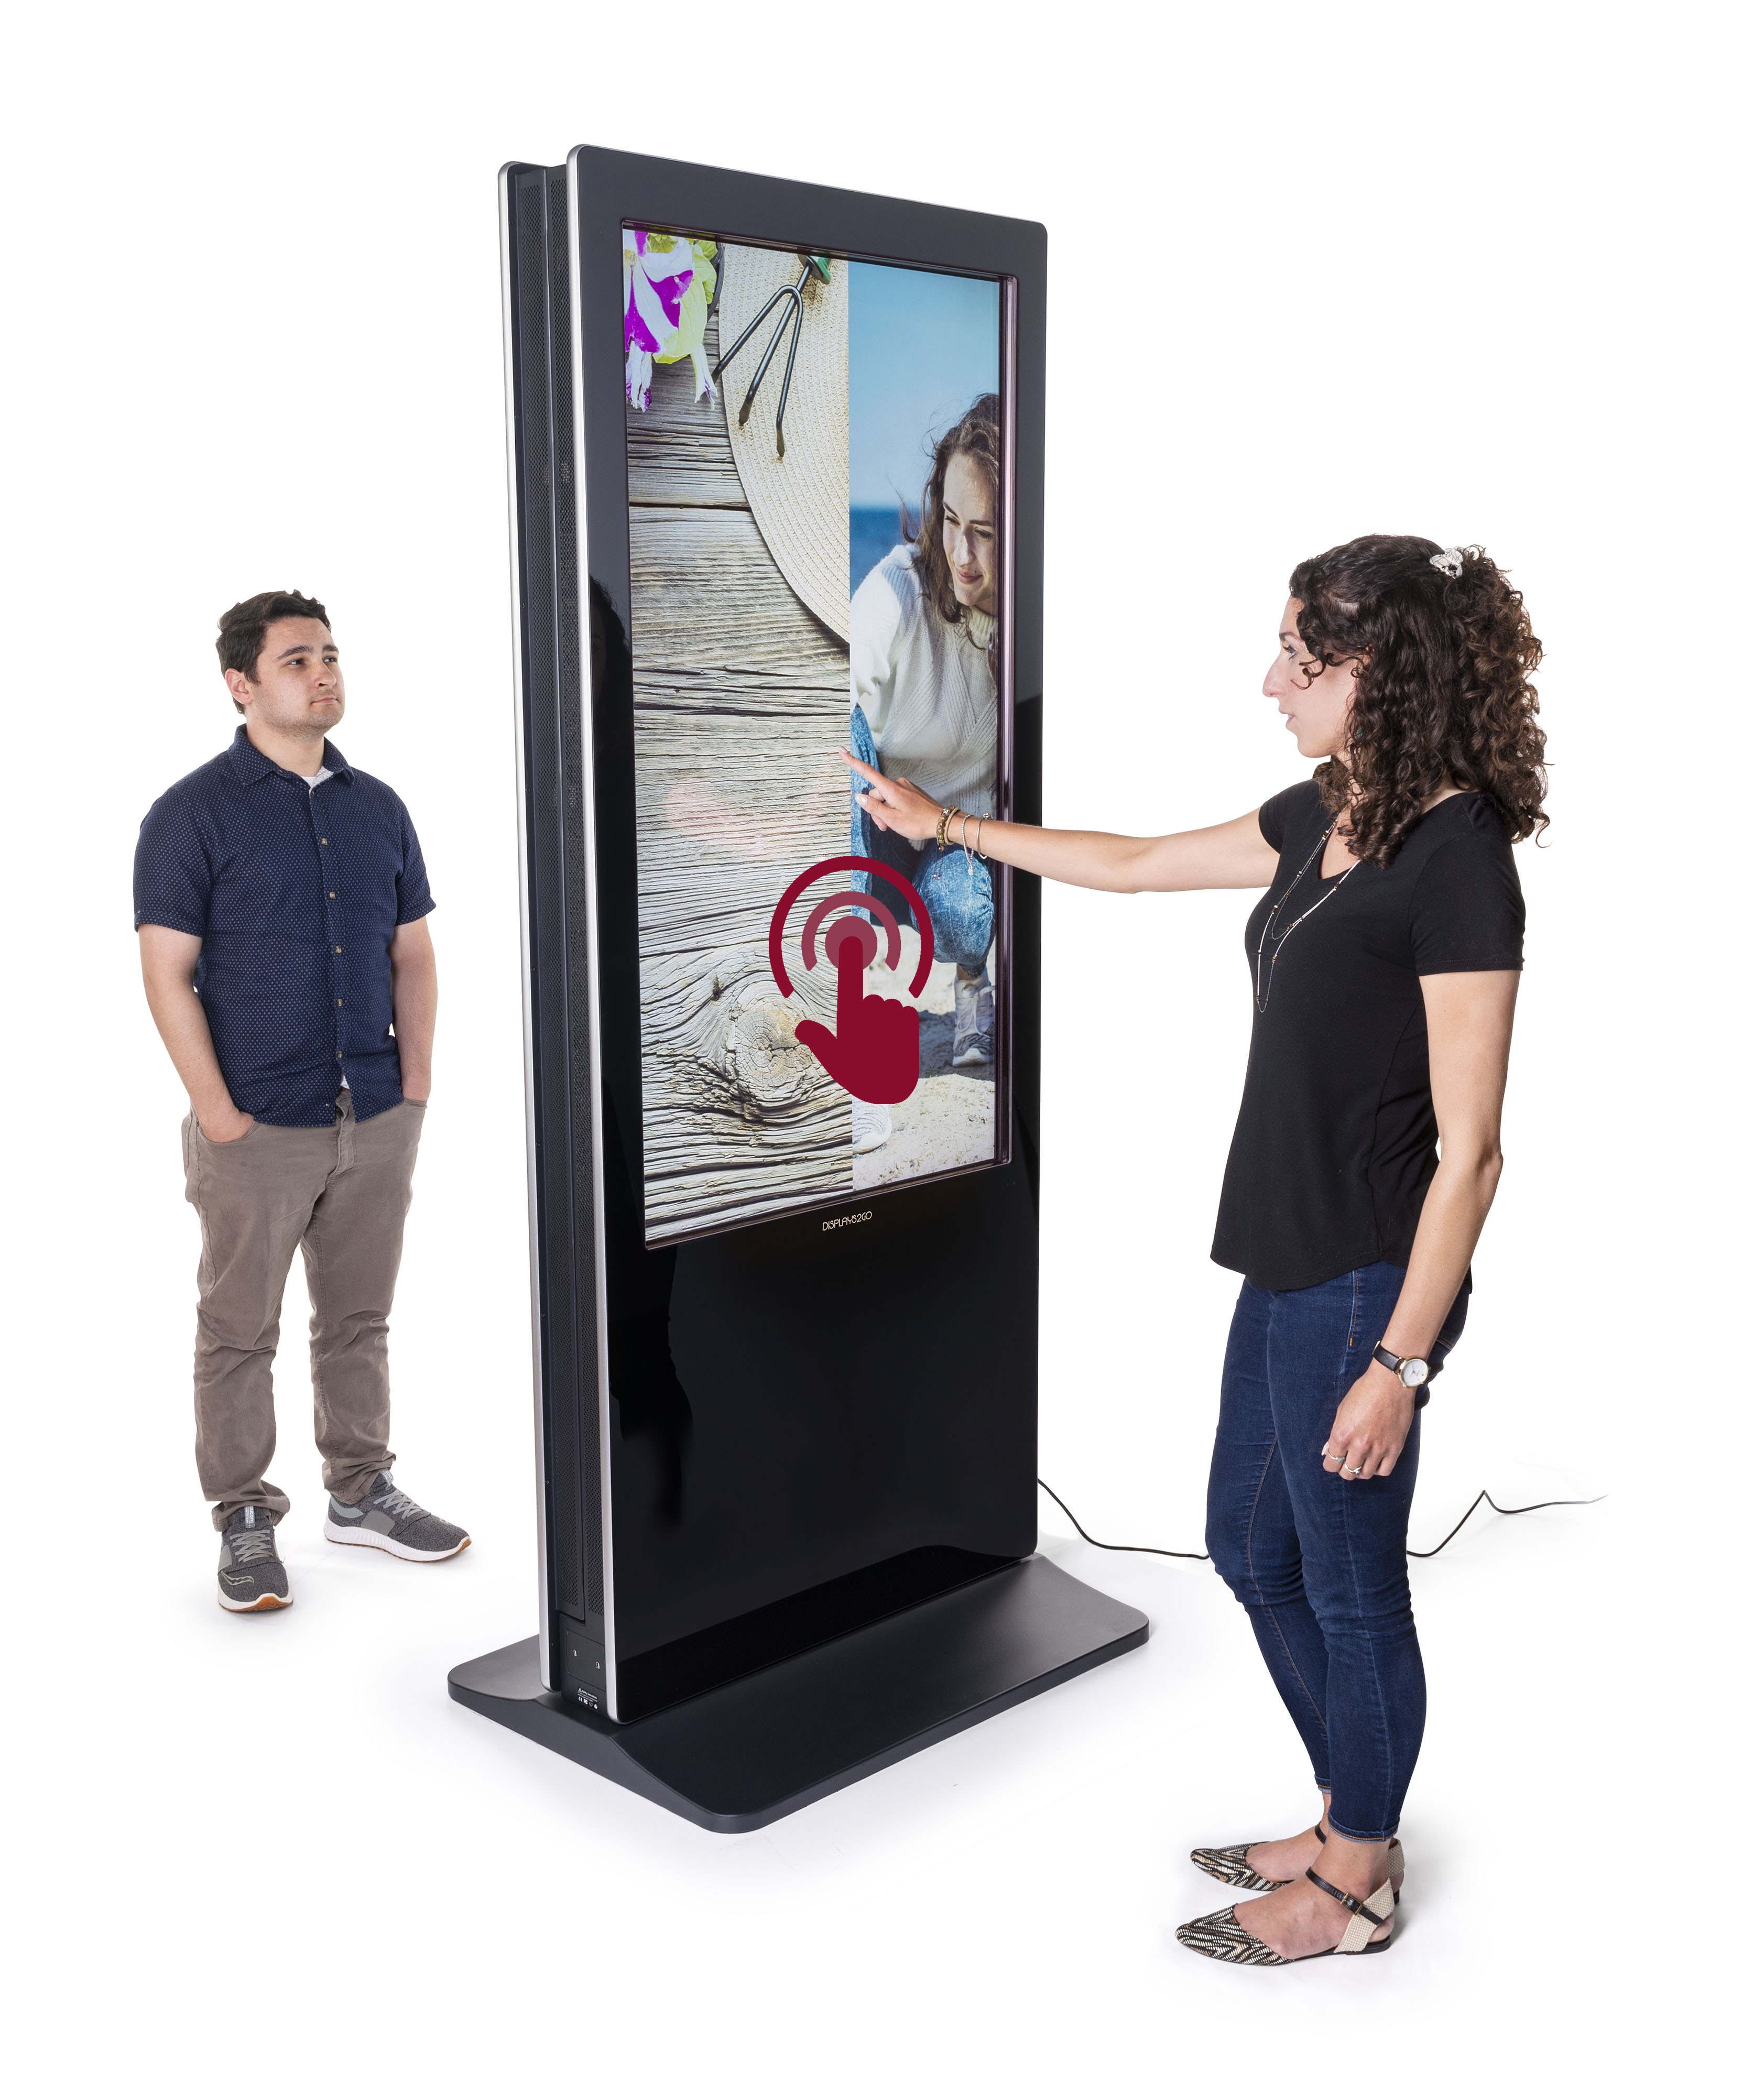 Double-sided digital non-touch display with user-friendly features